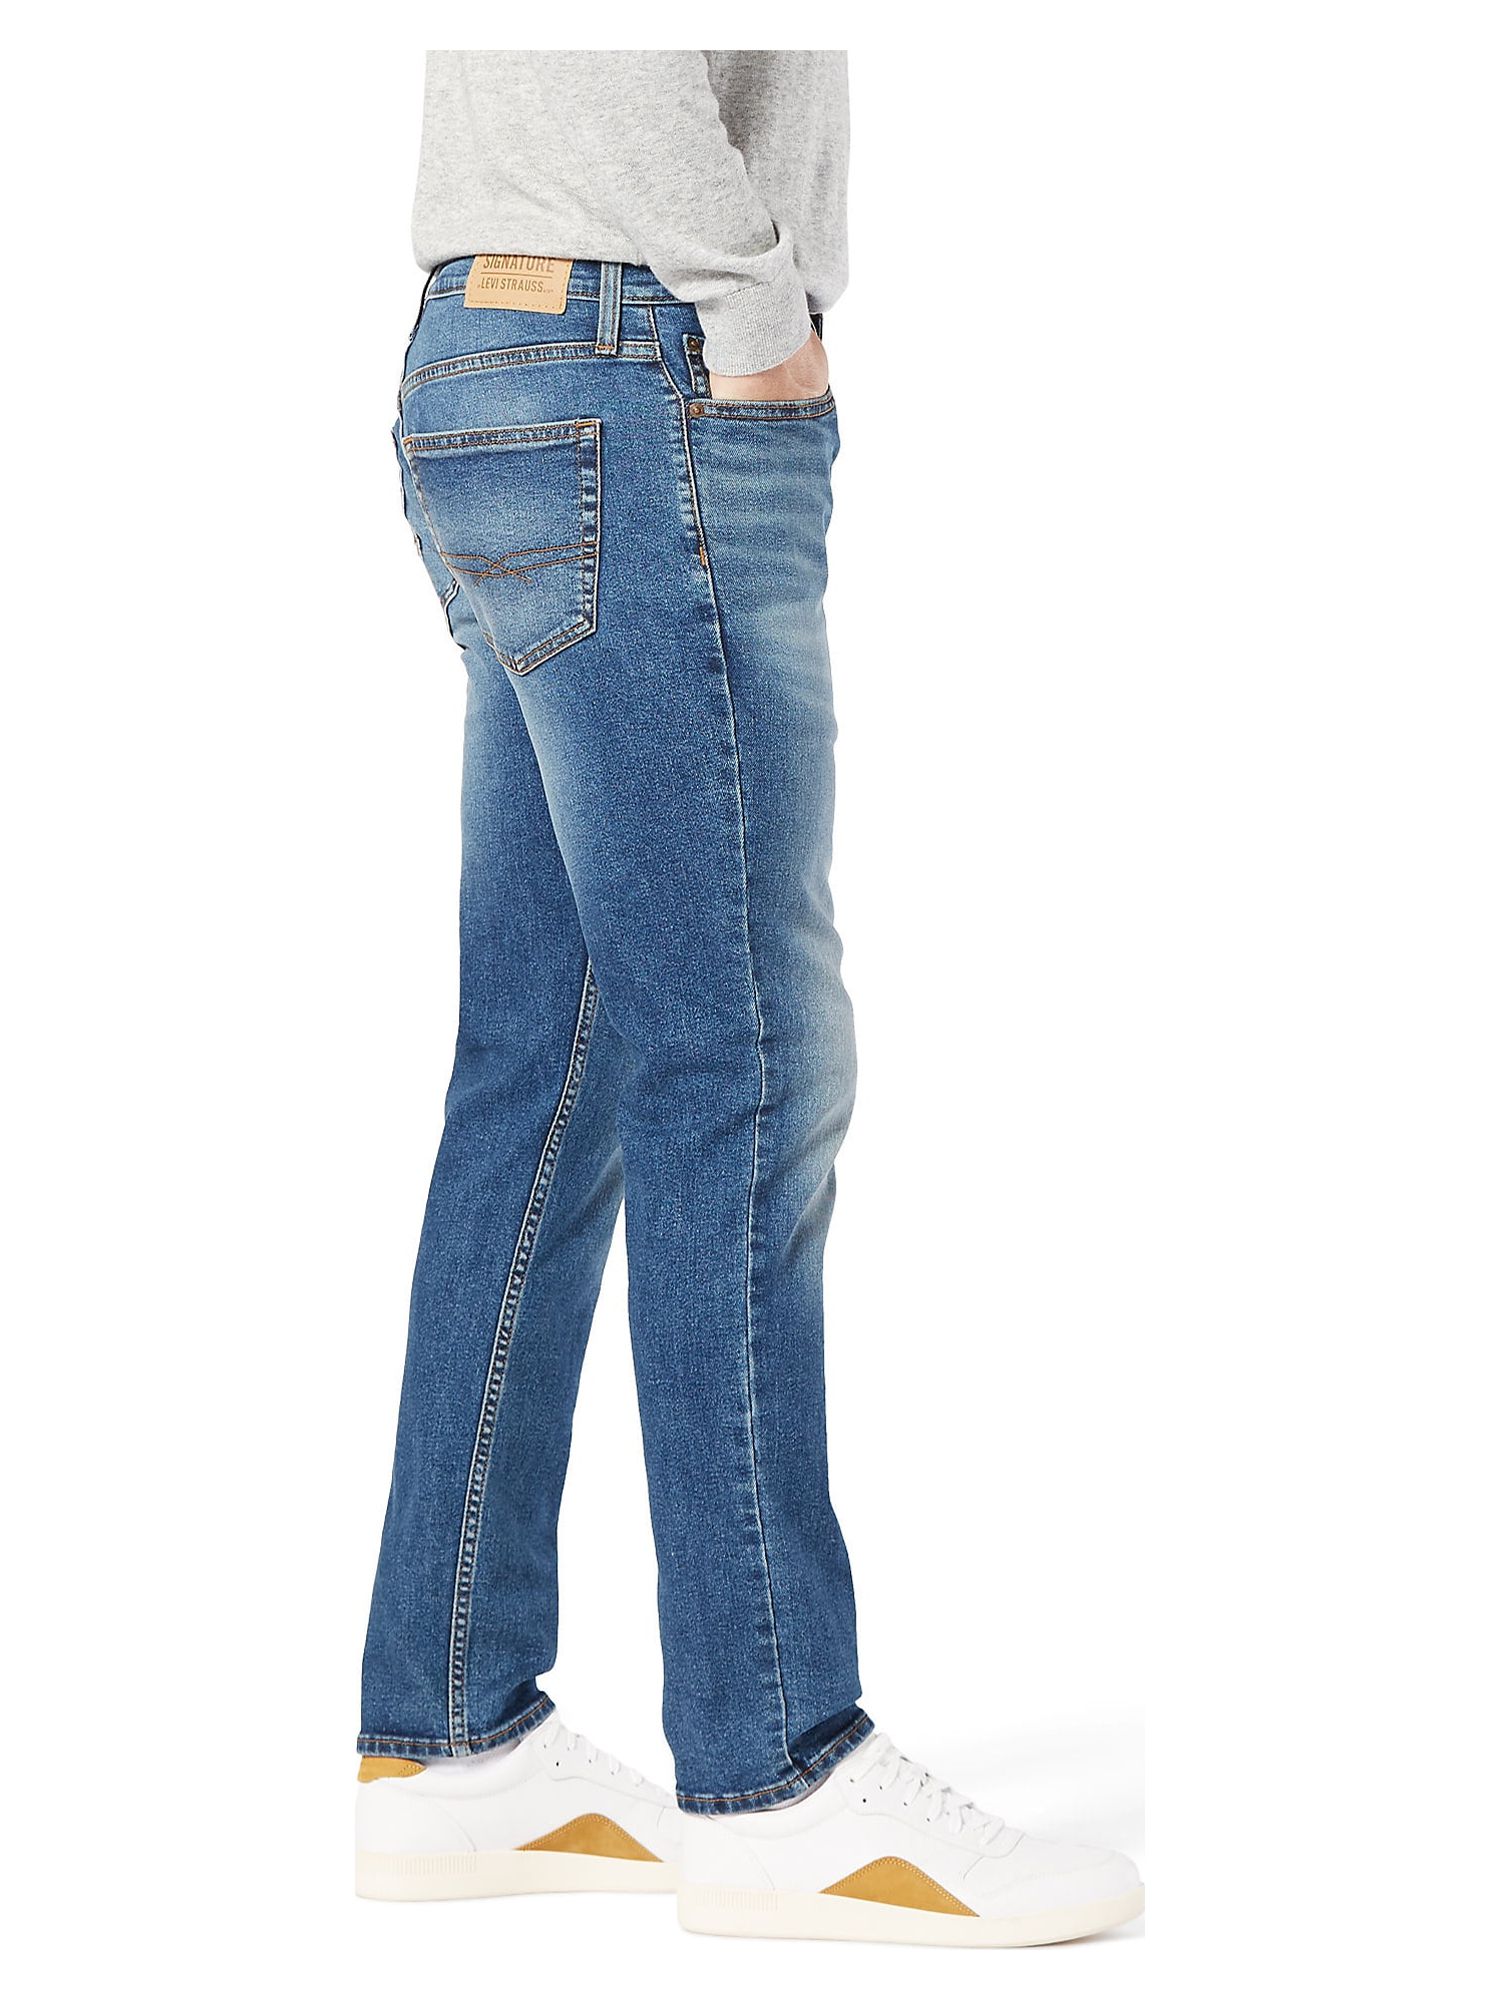 Signature by Levi Strauss & Co. Men’s and Big and Tall Slim Fit Jeans - image 4 of 6